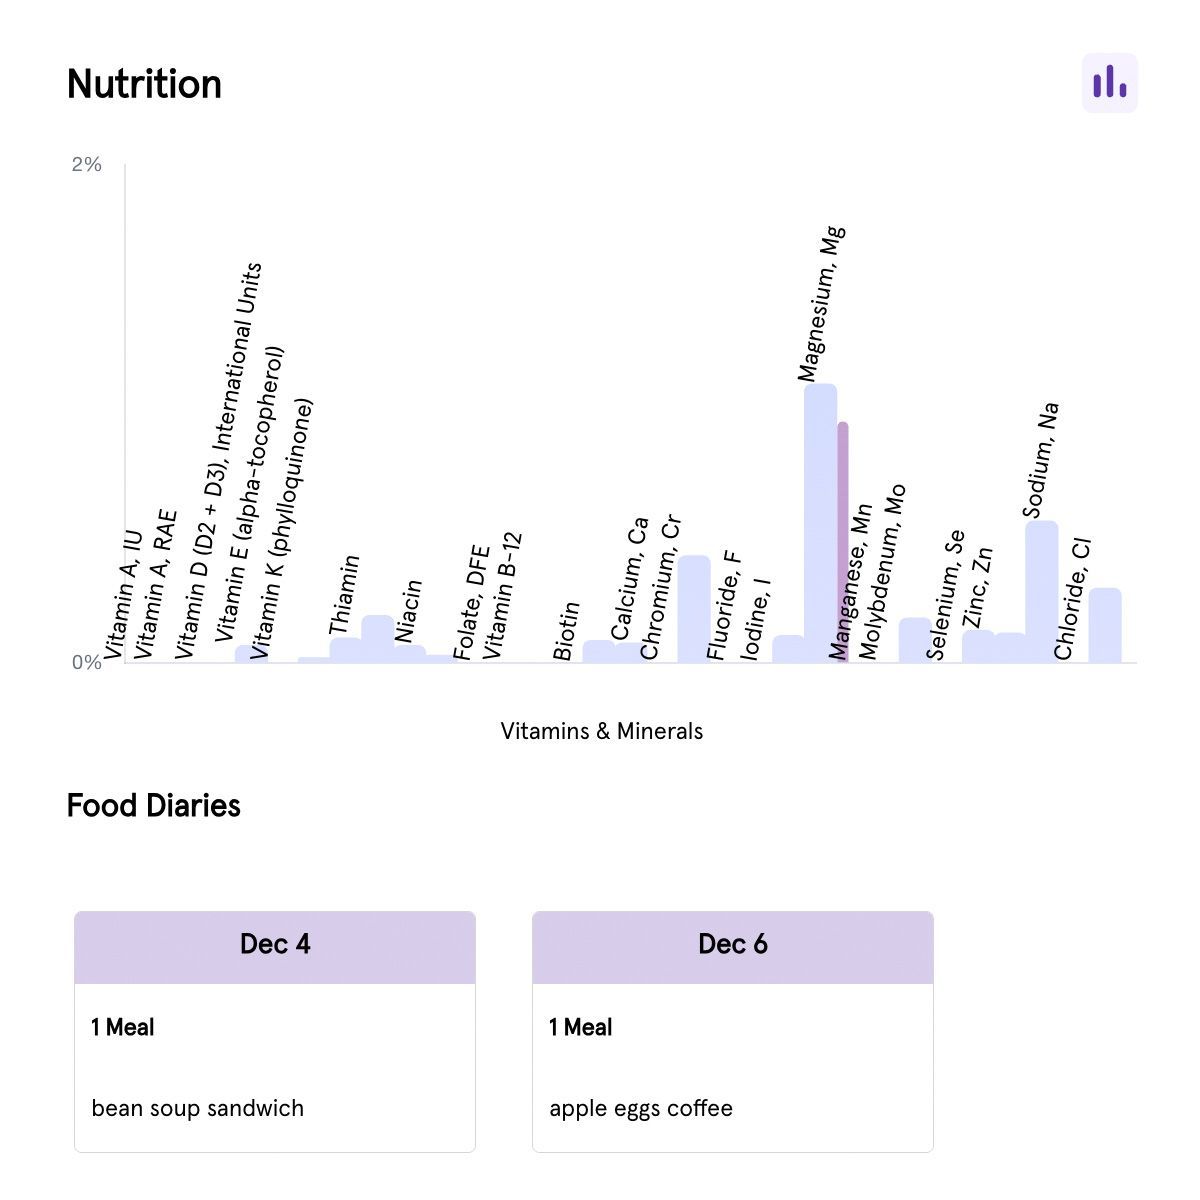 a graph showing the amount of vitamins and minerals in food diaries